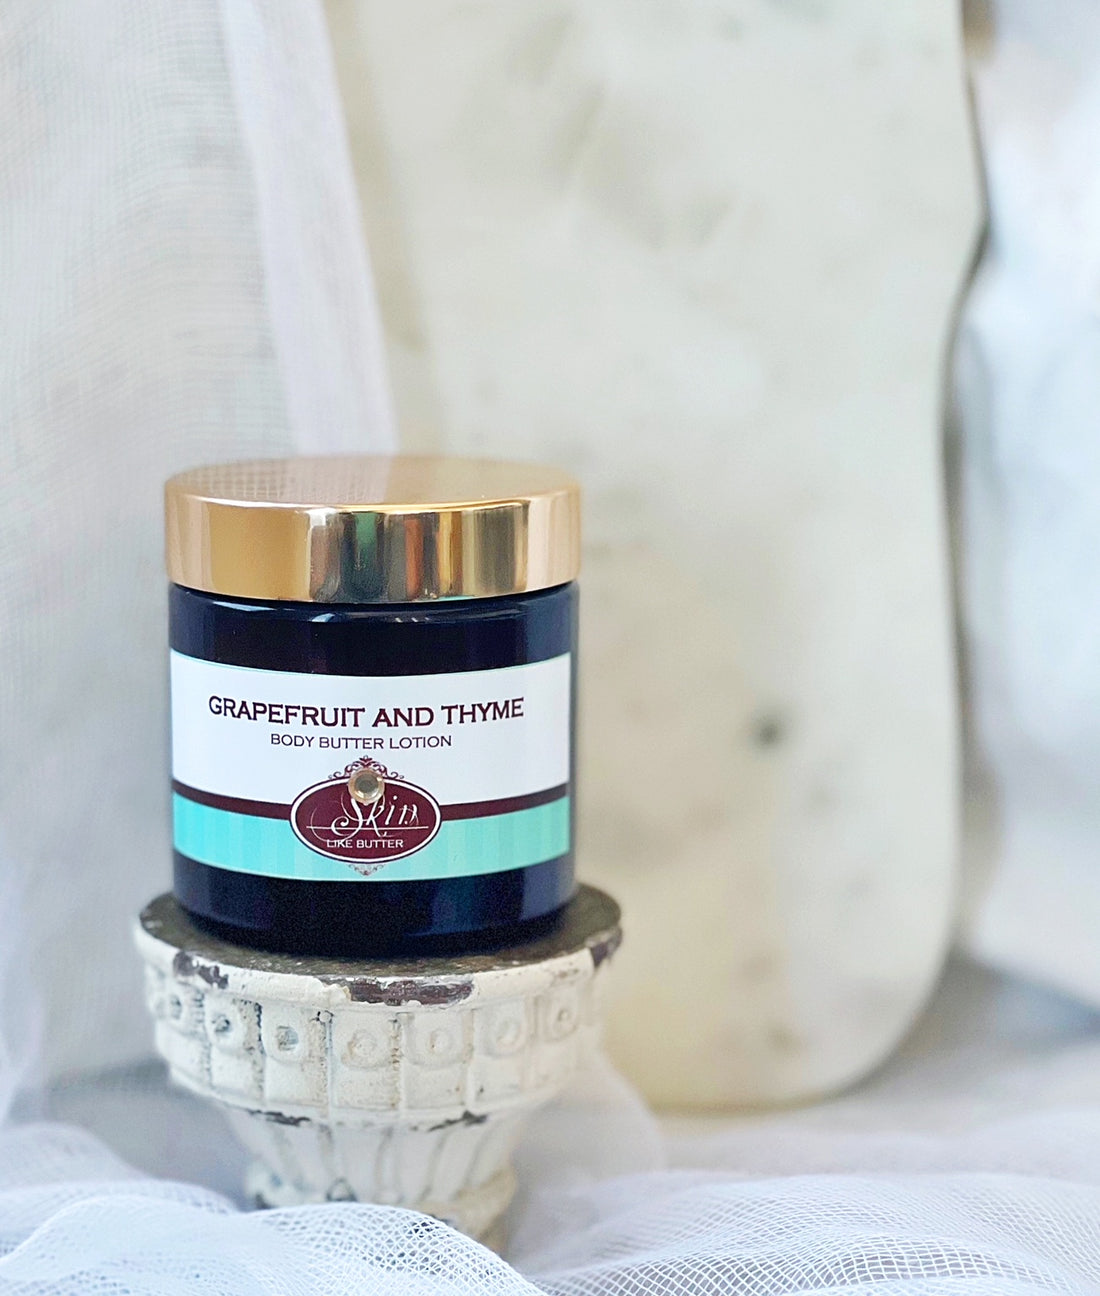 EMBER  scented Body Butter, waterfree and non-greasy, vegan